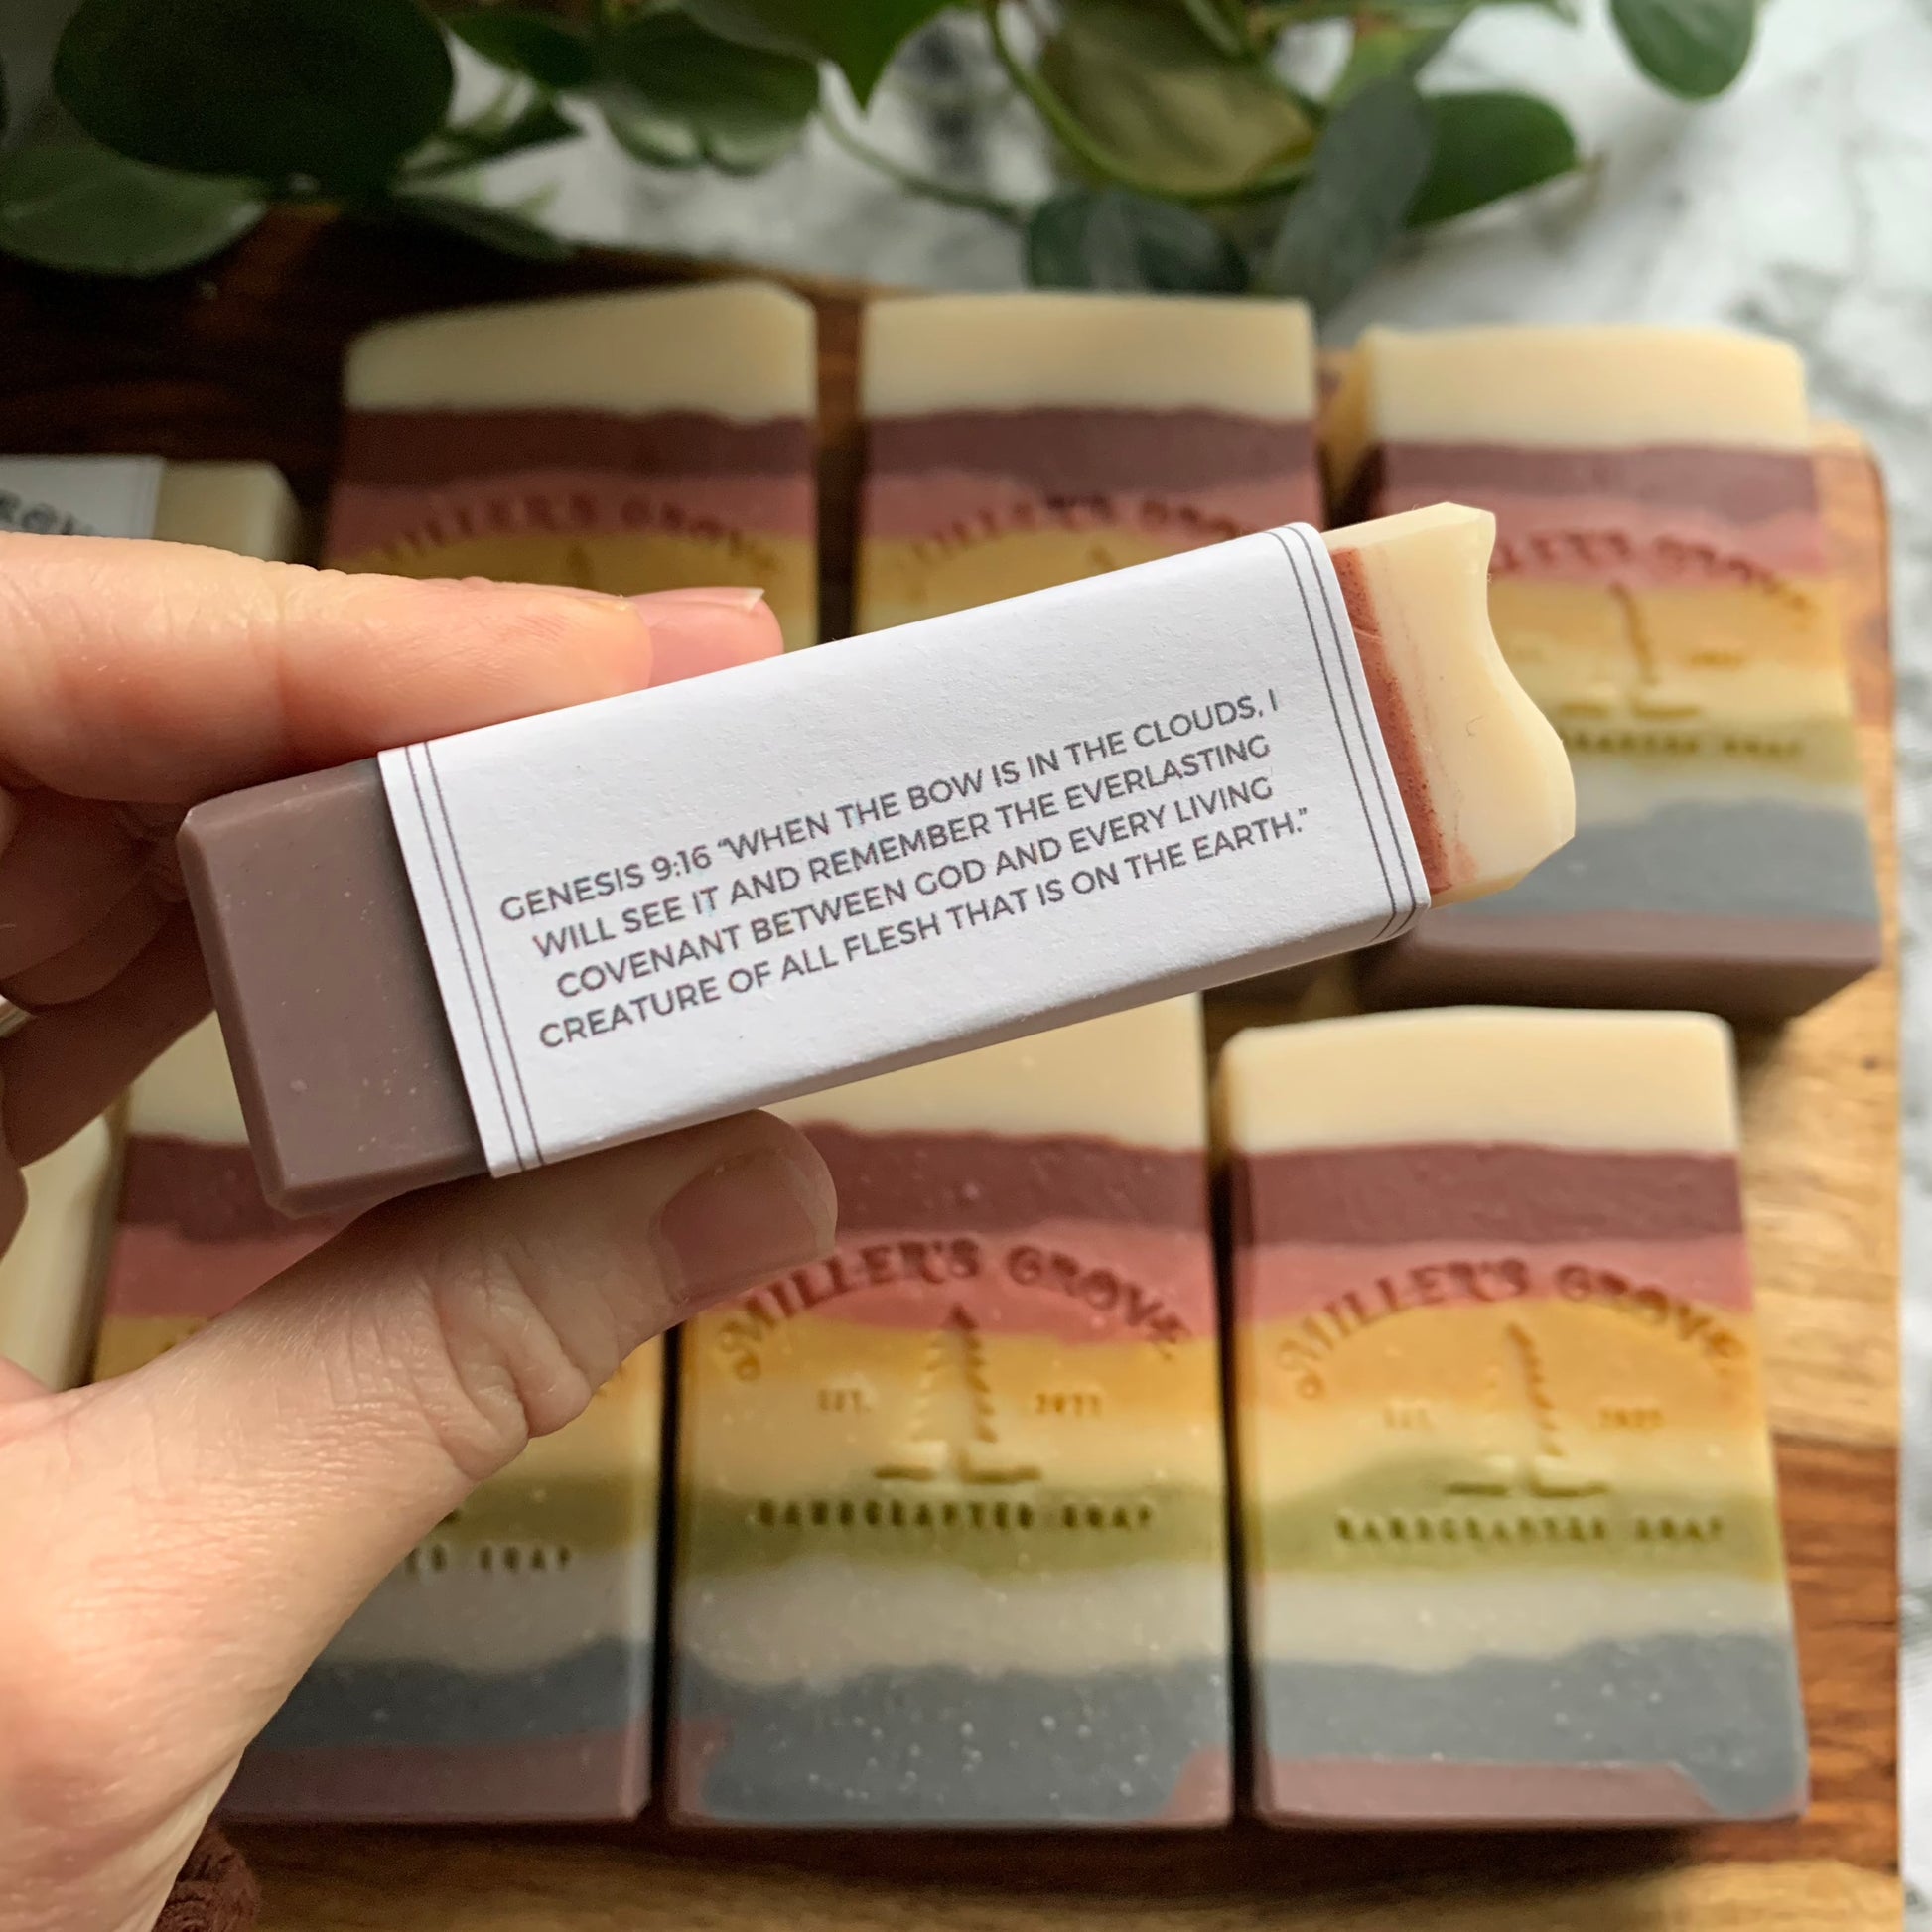 Rainbow colored soap bars with Genesis 9:16 typed on the side of the label